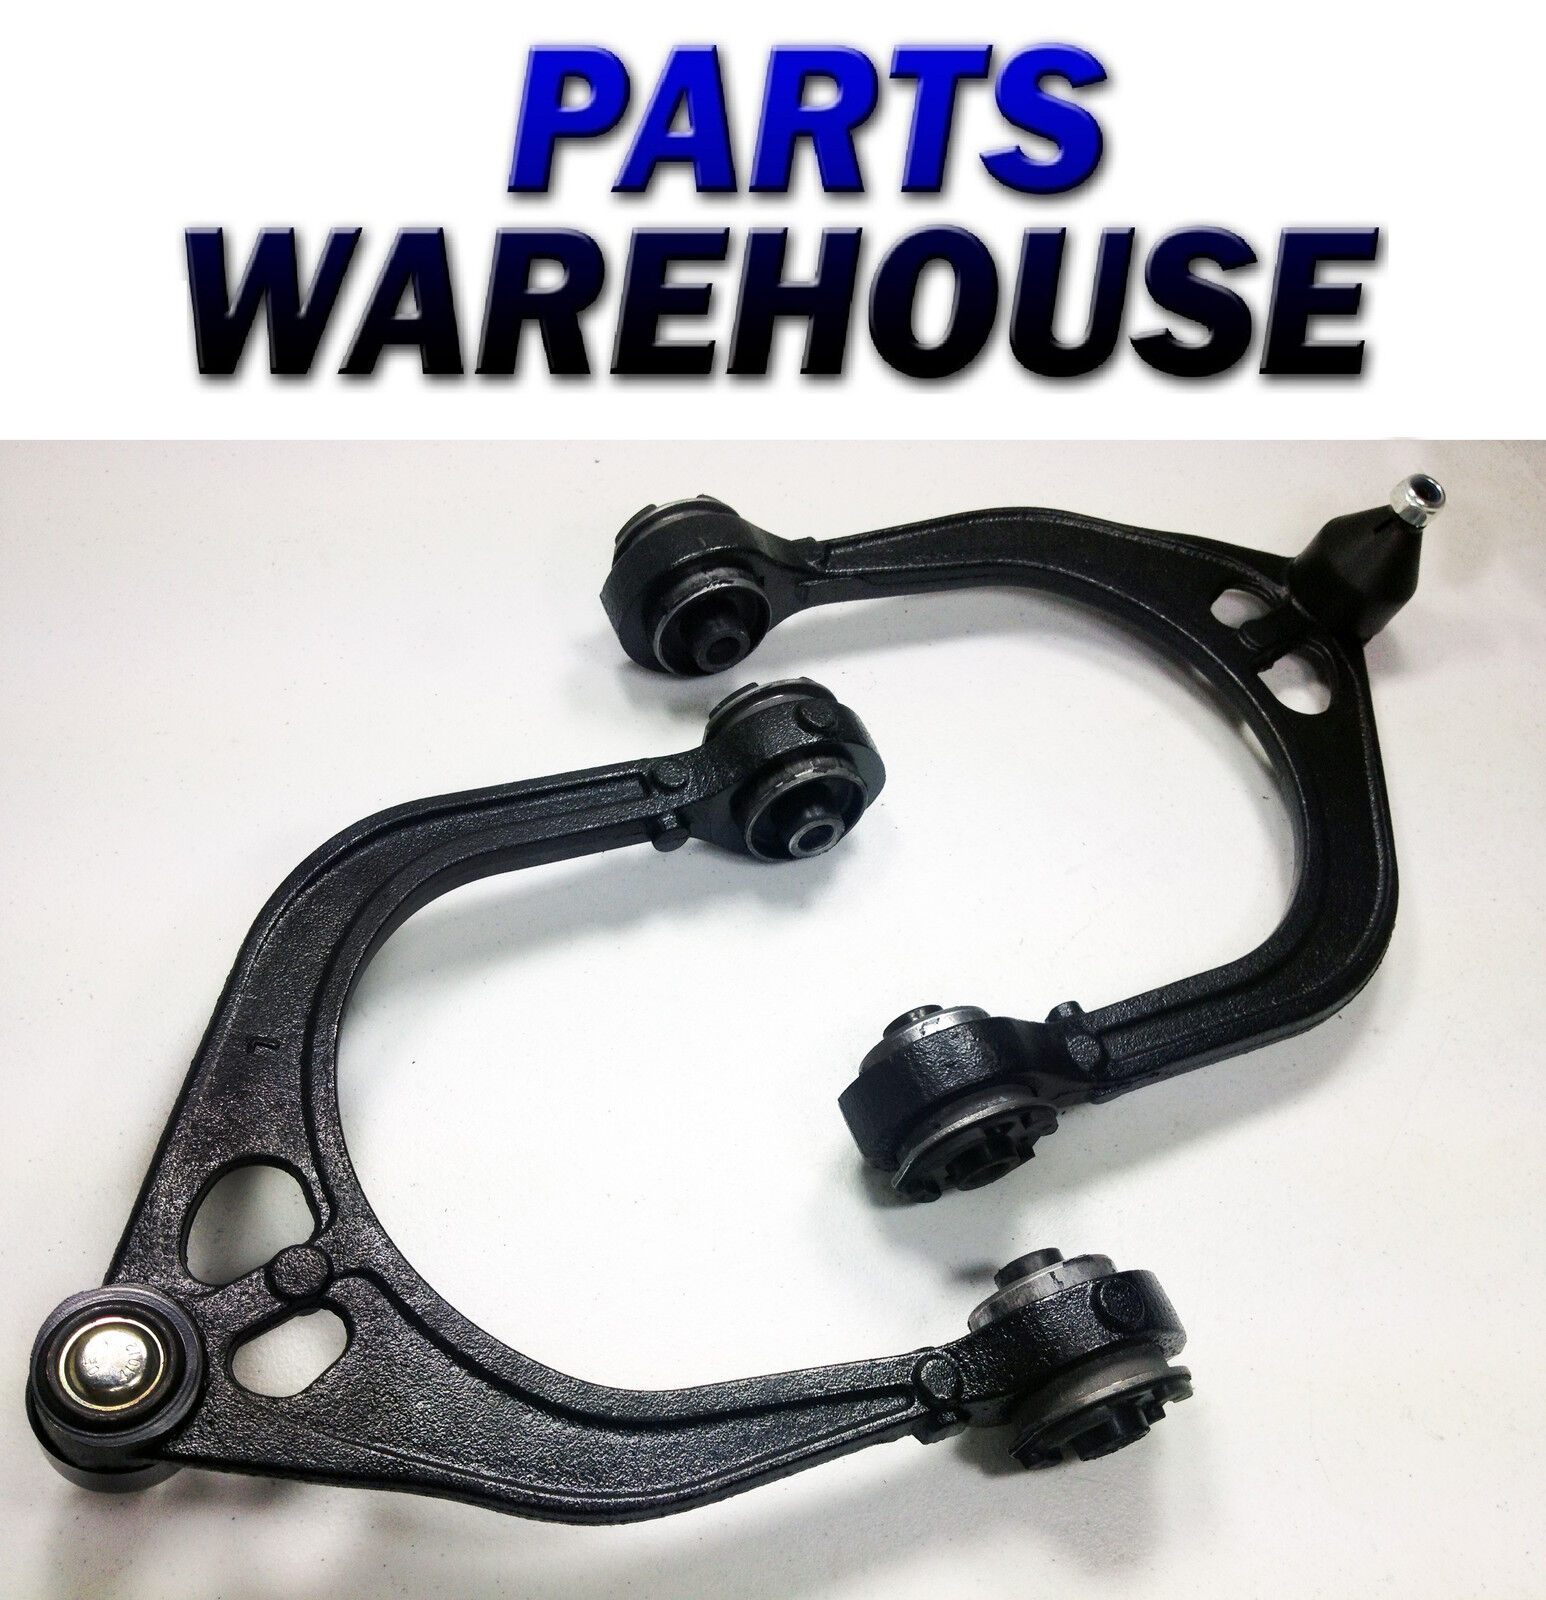 2 Upper Control Arm Chrysler 300 Charger 05-08 Ball L&R 1 Year Warranty